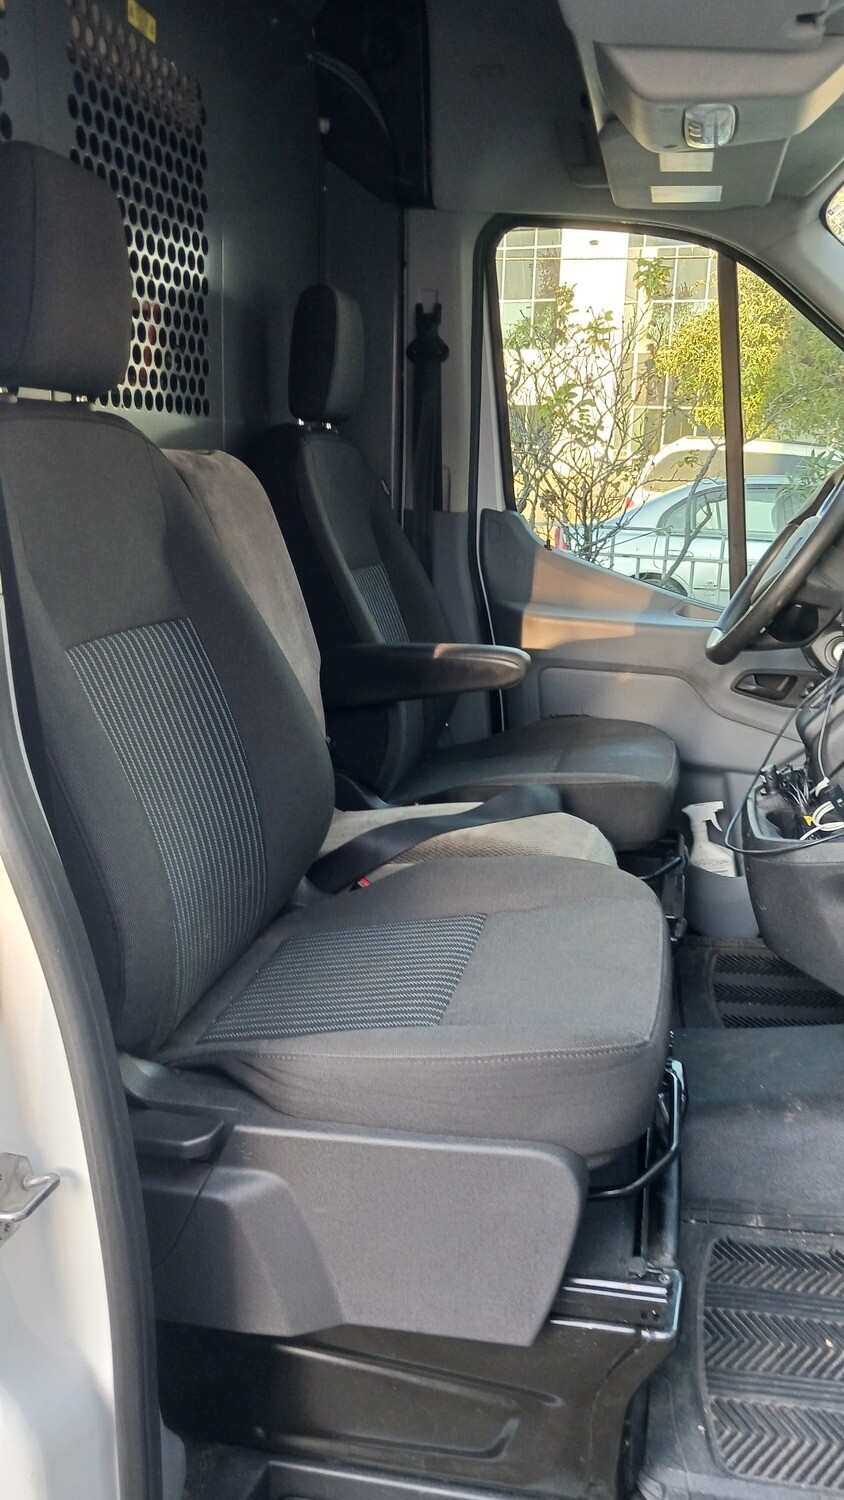 Centre Seat for Ford Transit - Beige Colour